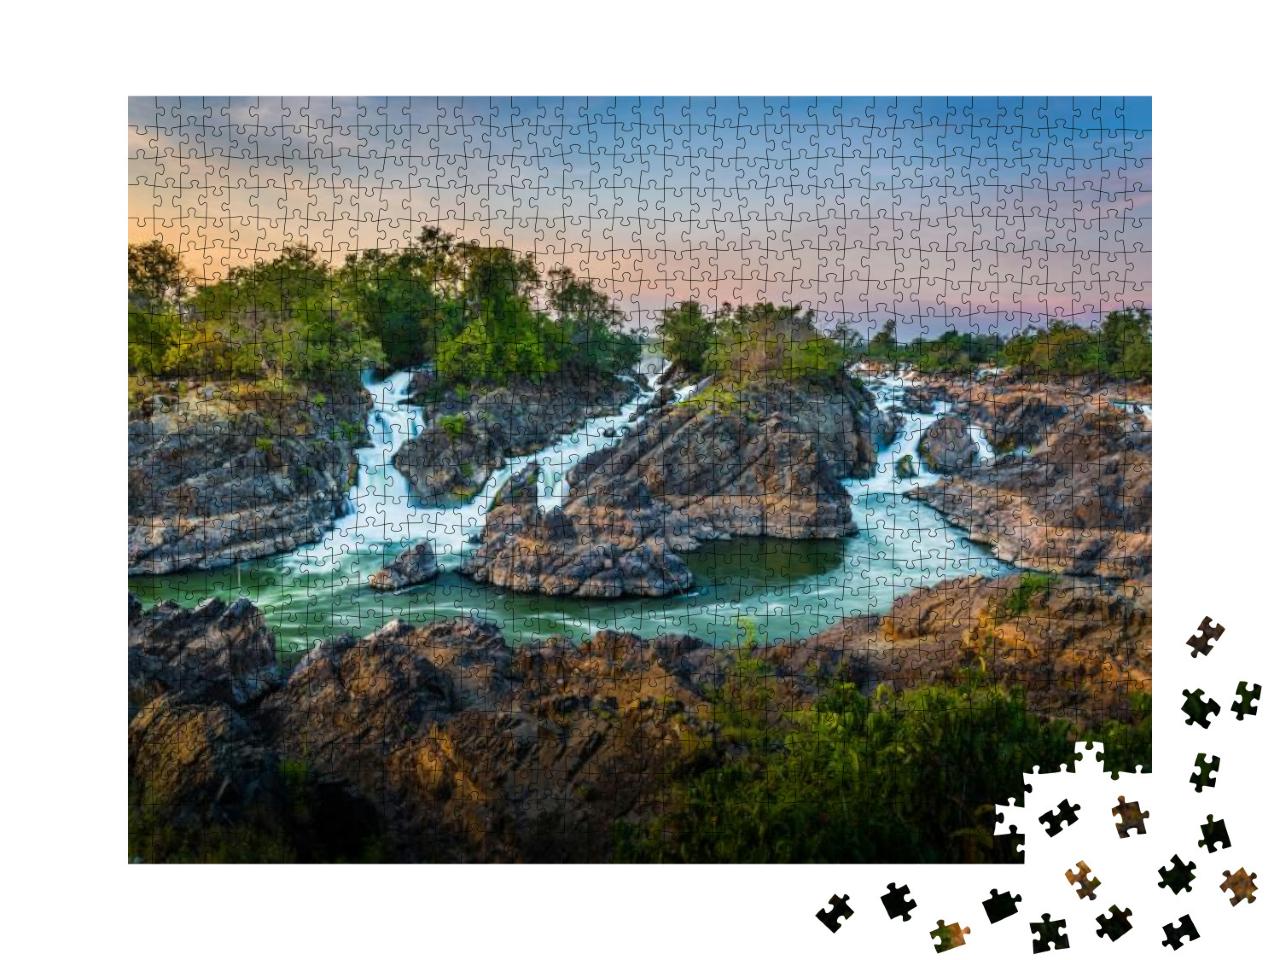 4000 Islands is Very Beautiful & Crazy River At Champasak... Jigsaw Puzzle with 1000 pieces